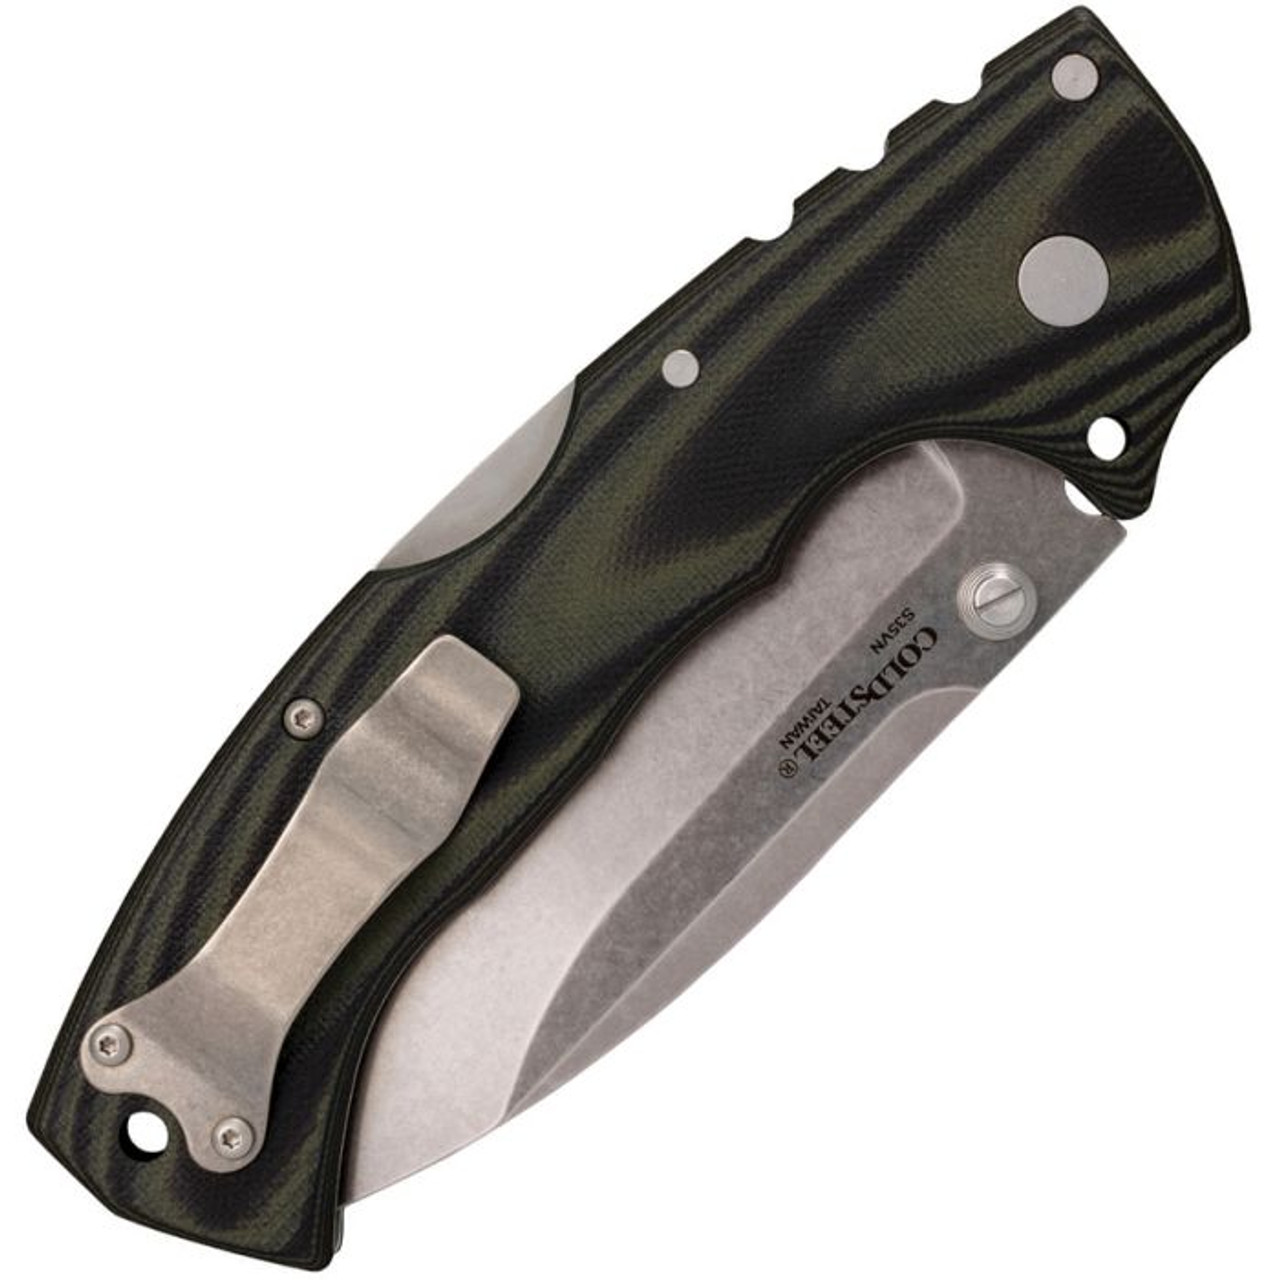 Cold Steel 4-Max Elite (CS62RMA) 4" CPM-S35VN Stonewashed Drop Point Plain Blade, Black and Green G-10 Handle